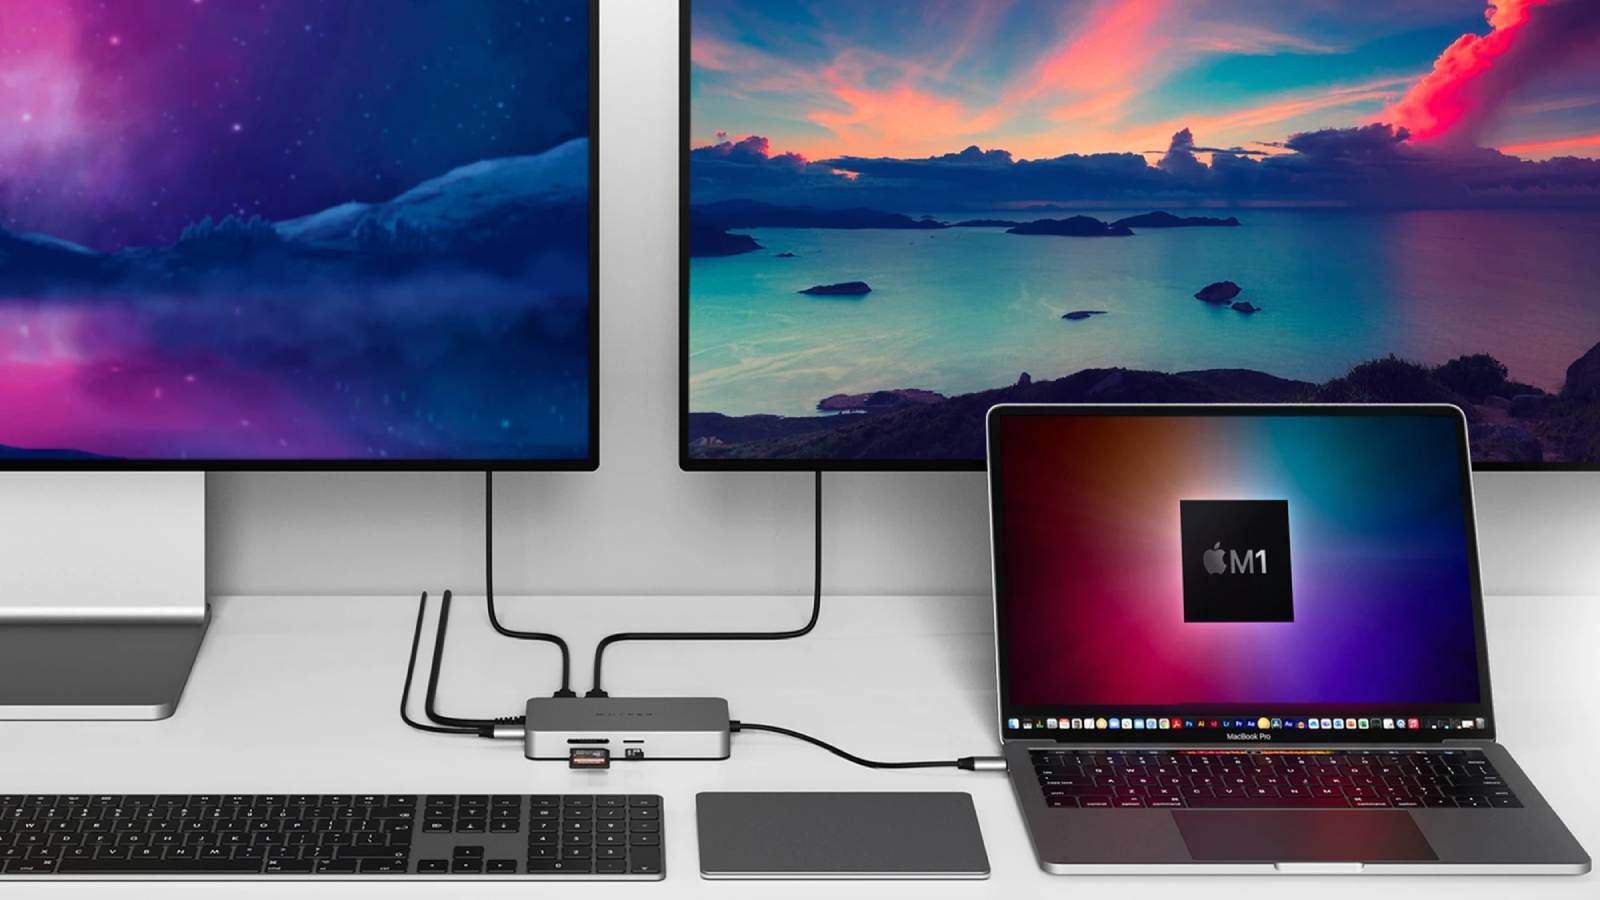 How to Set Up Dual Monitors on a Mac